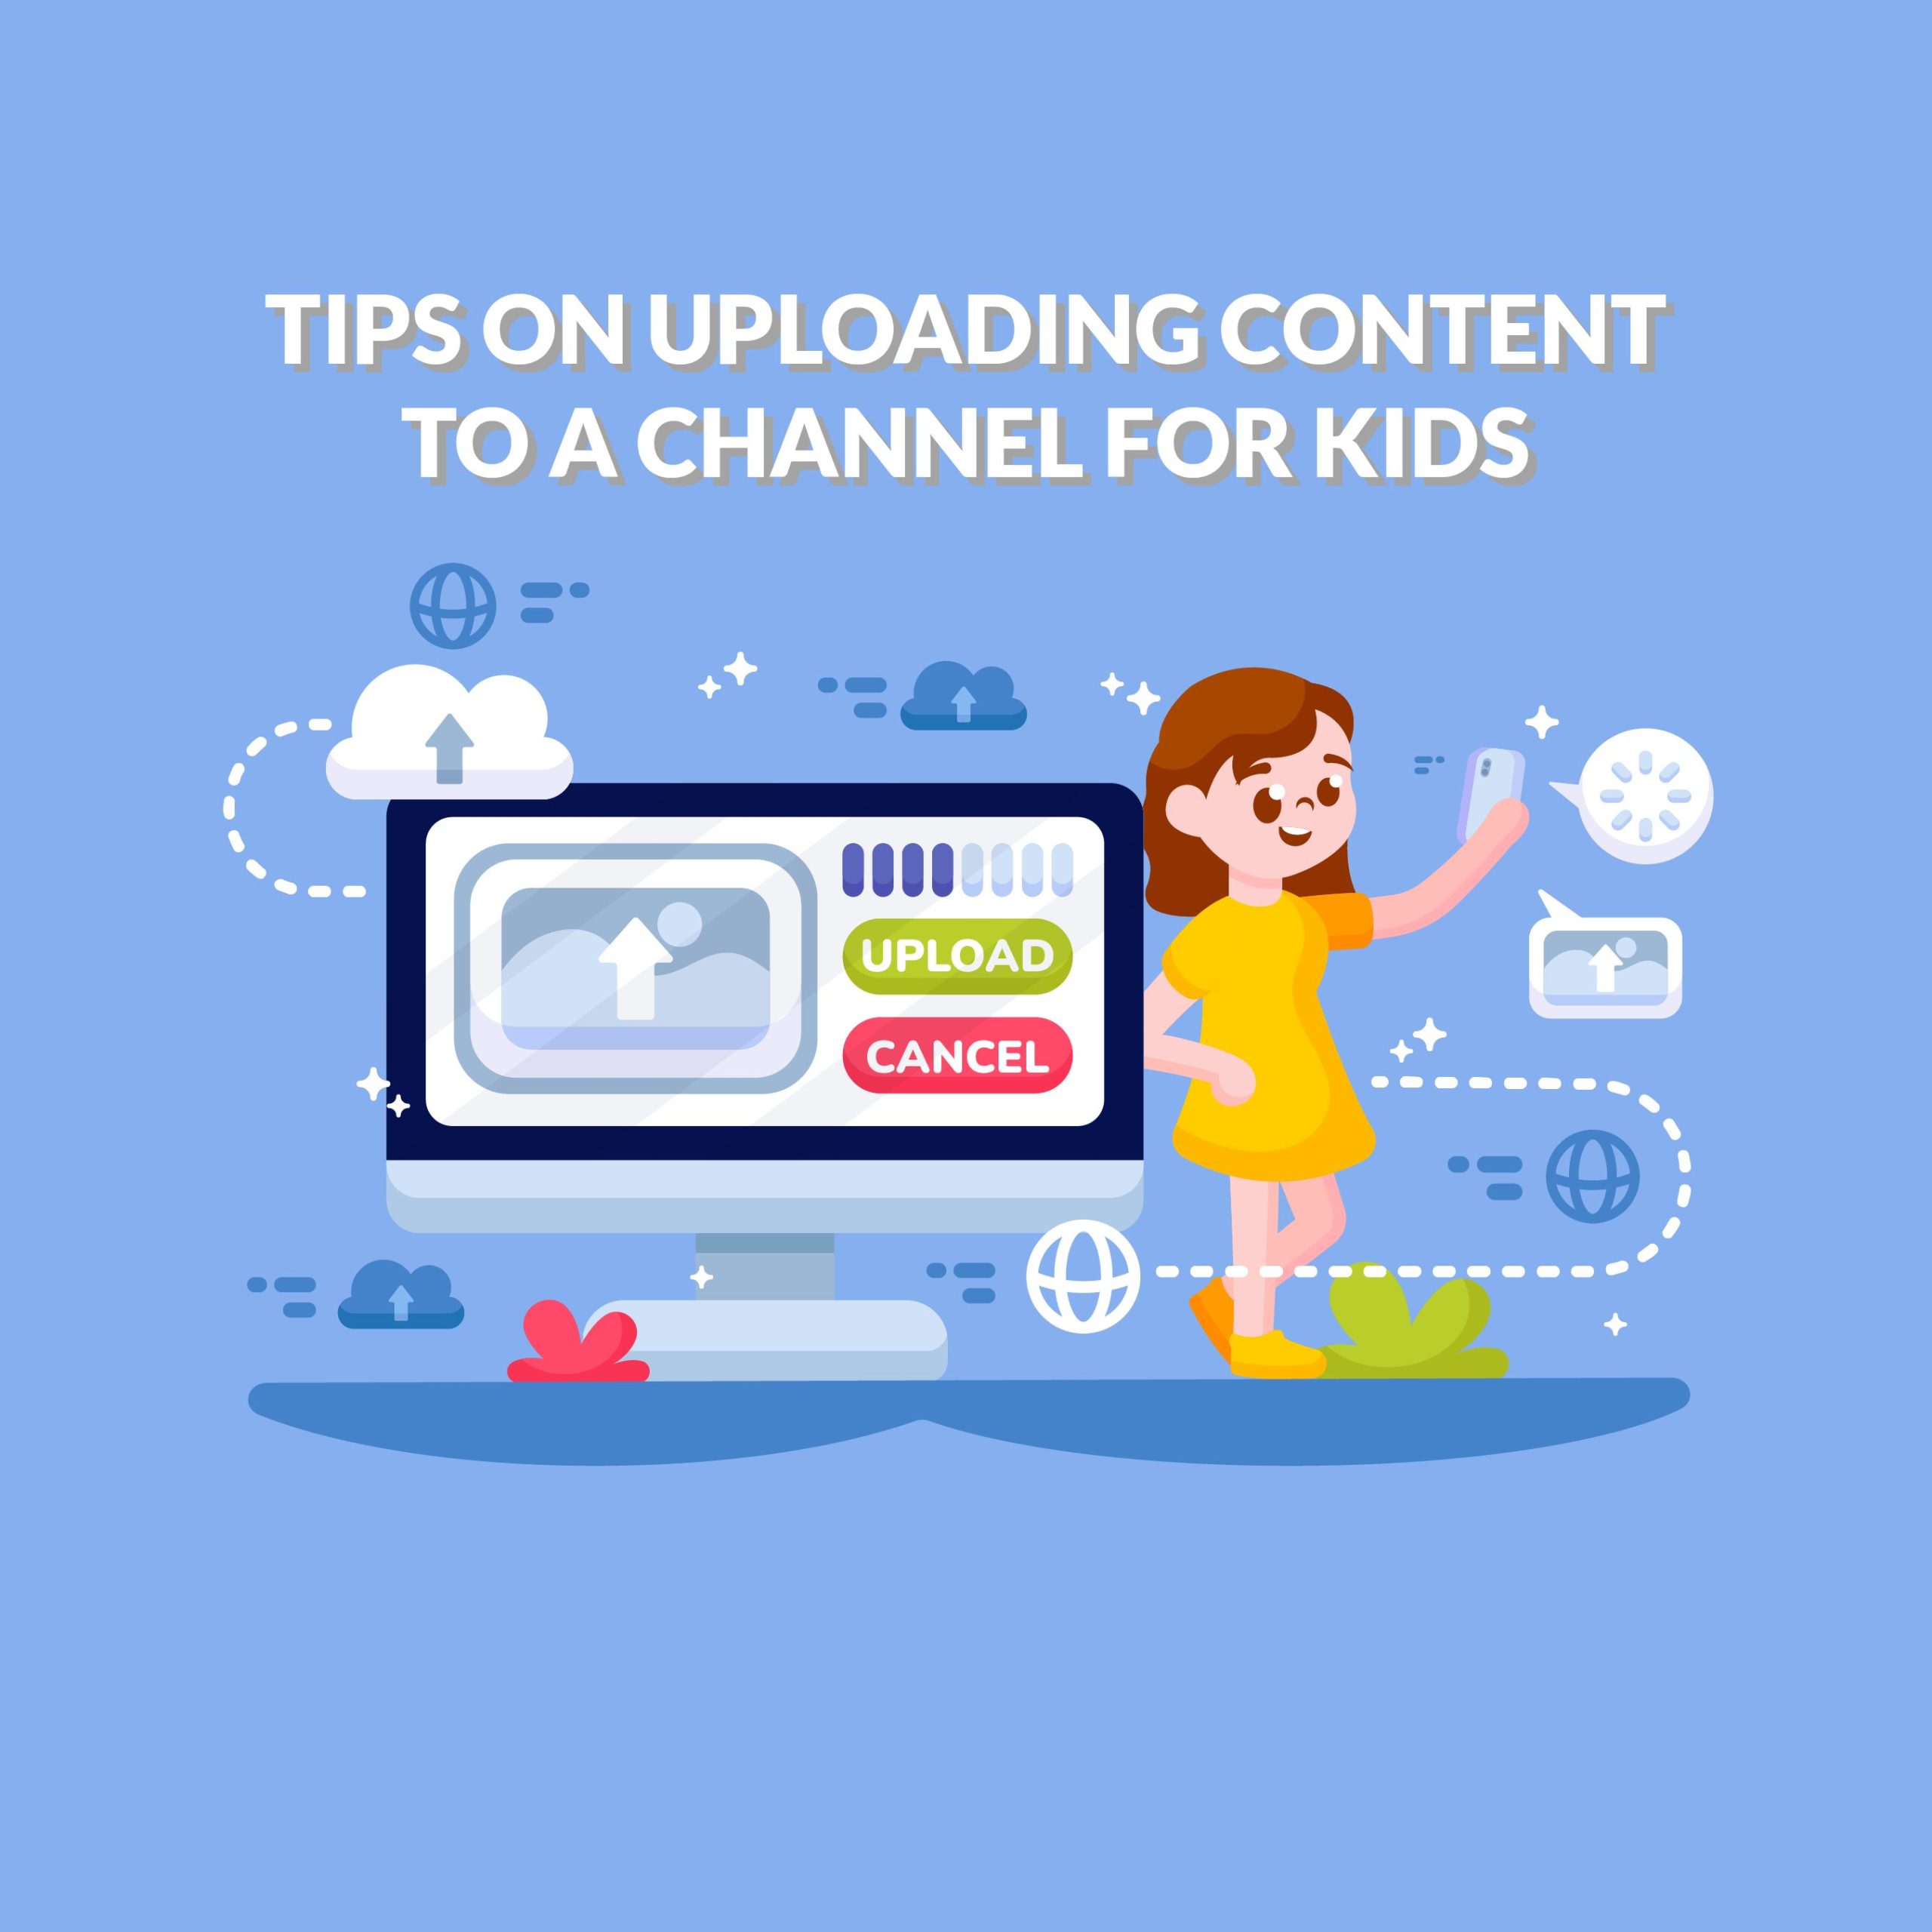 TIPS ON UPLOADING CONTENT TO A CHANNEL FOR KIDS